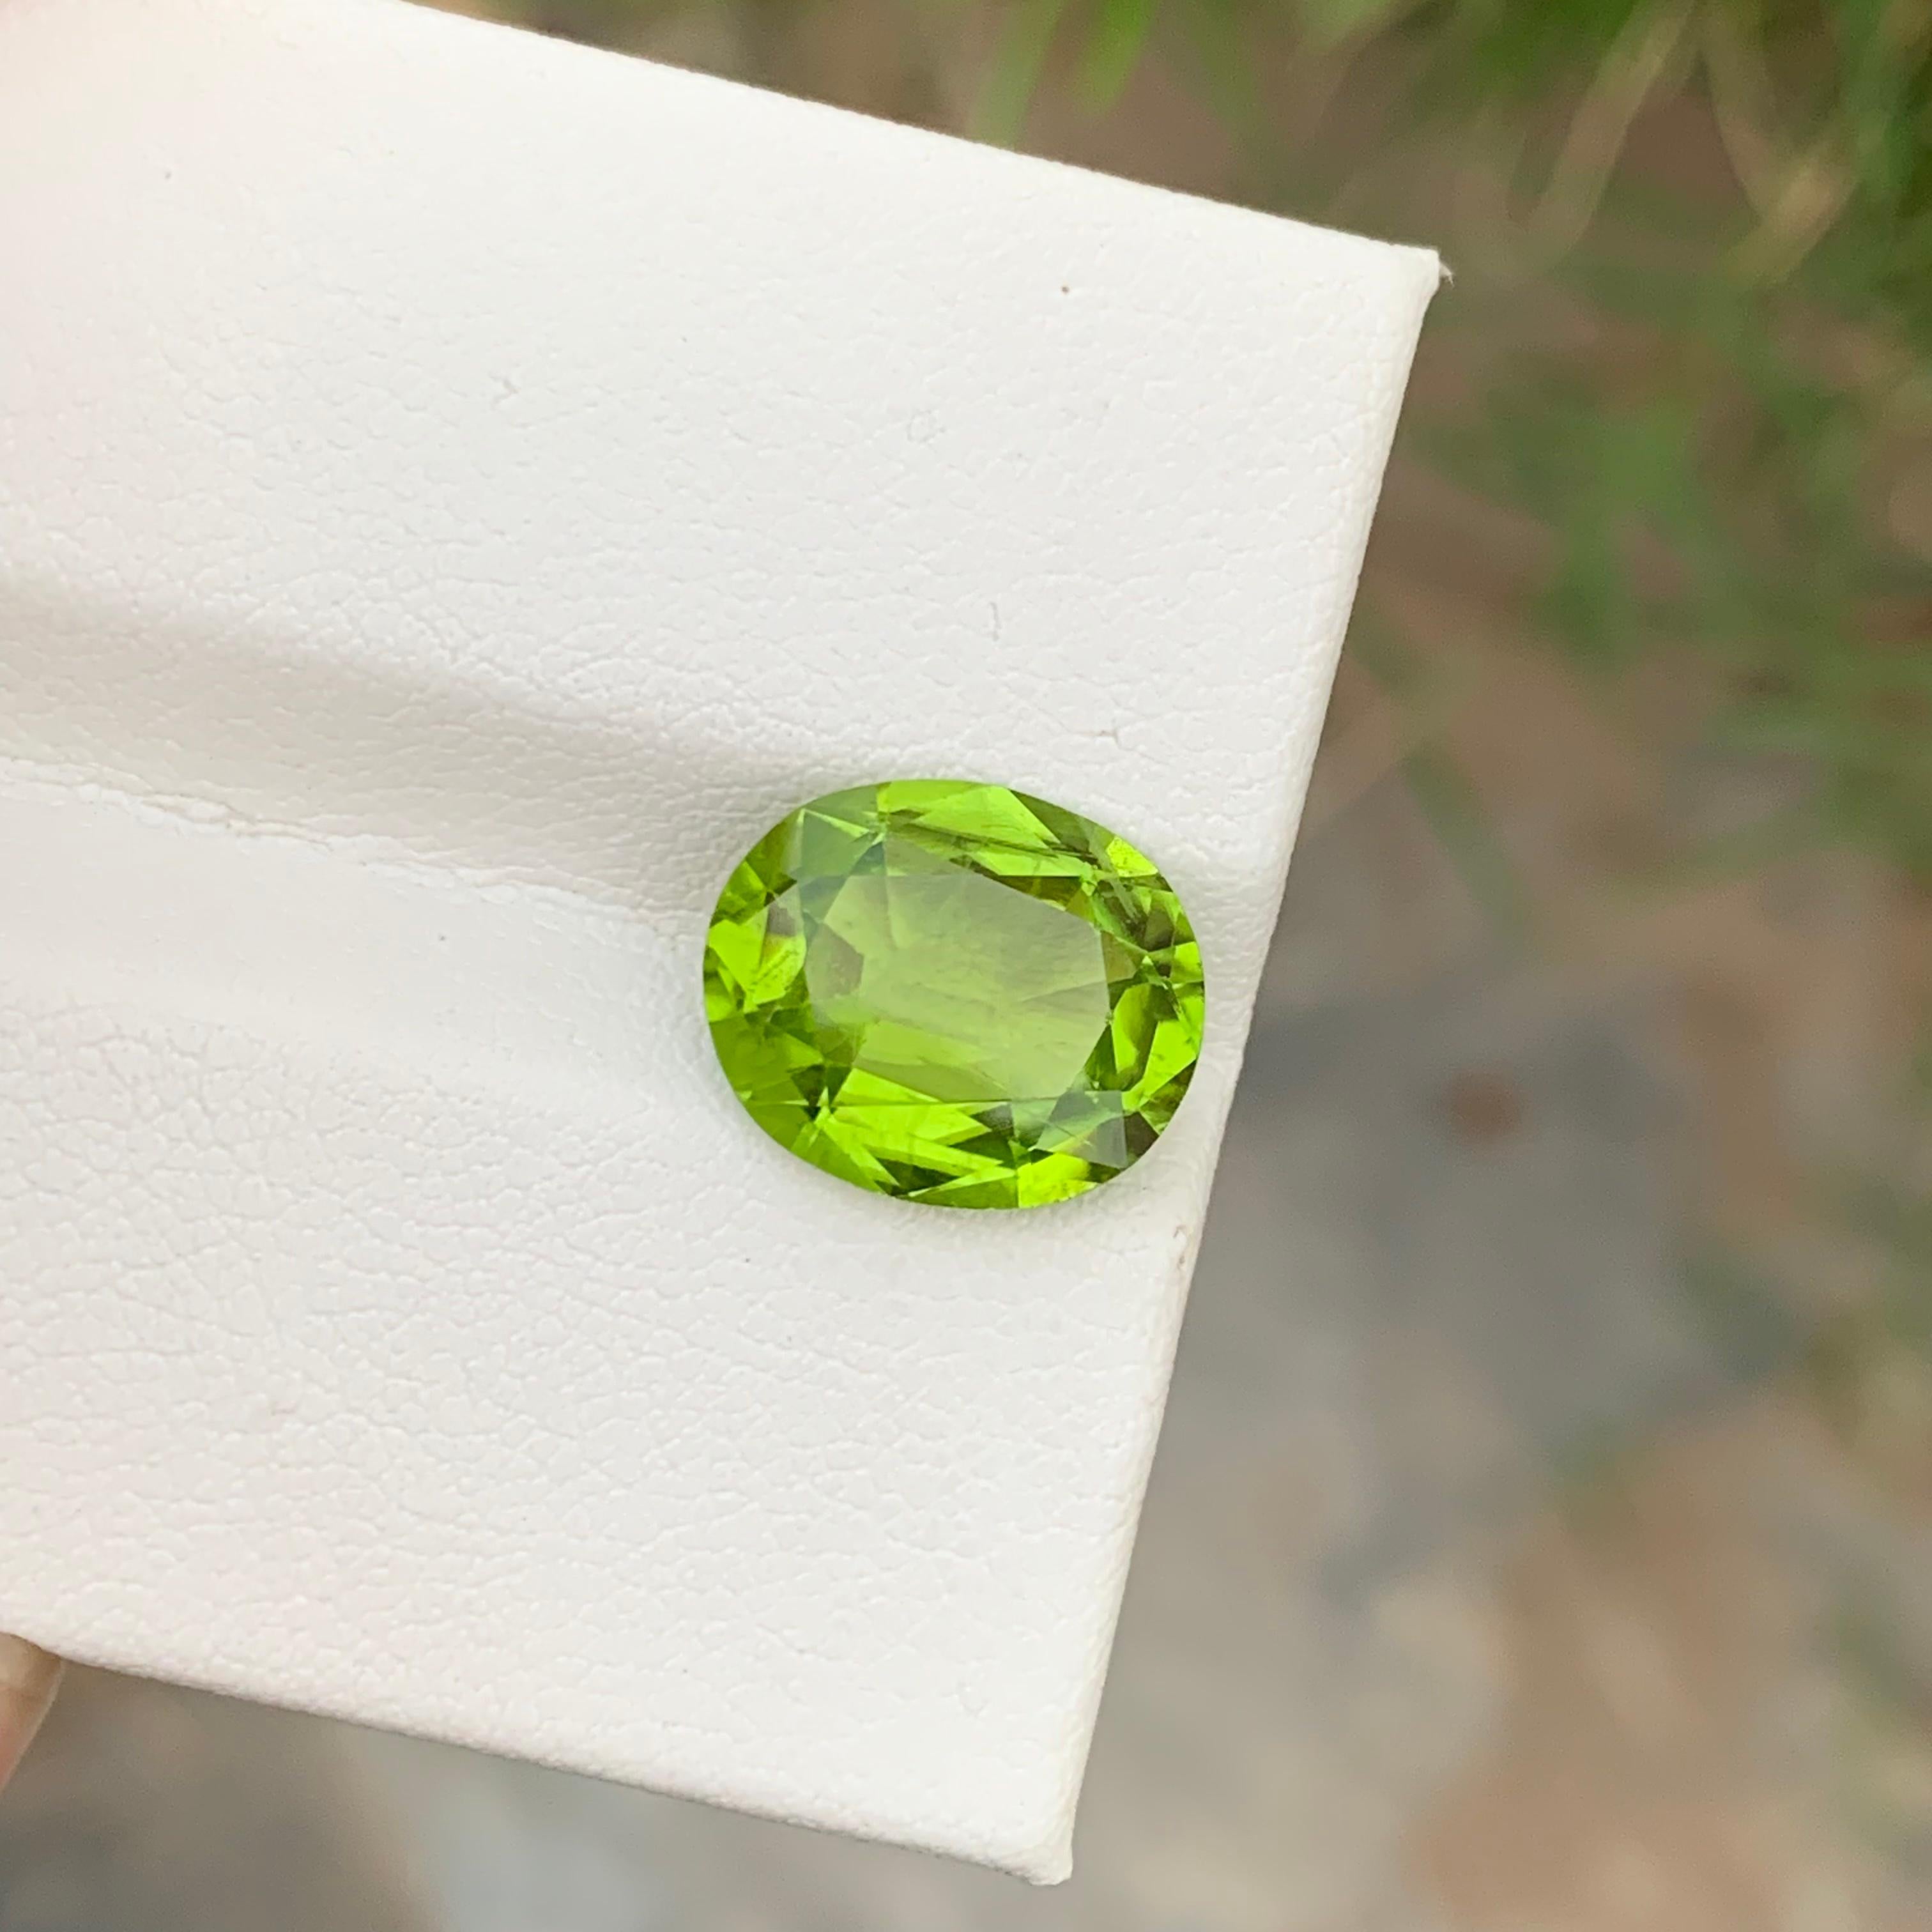 Oval Cut 5.35 Carats Natural Apple Green Loose Peridot Gem From Suppart Valley Mine For Sale